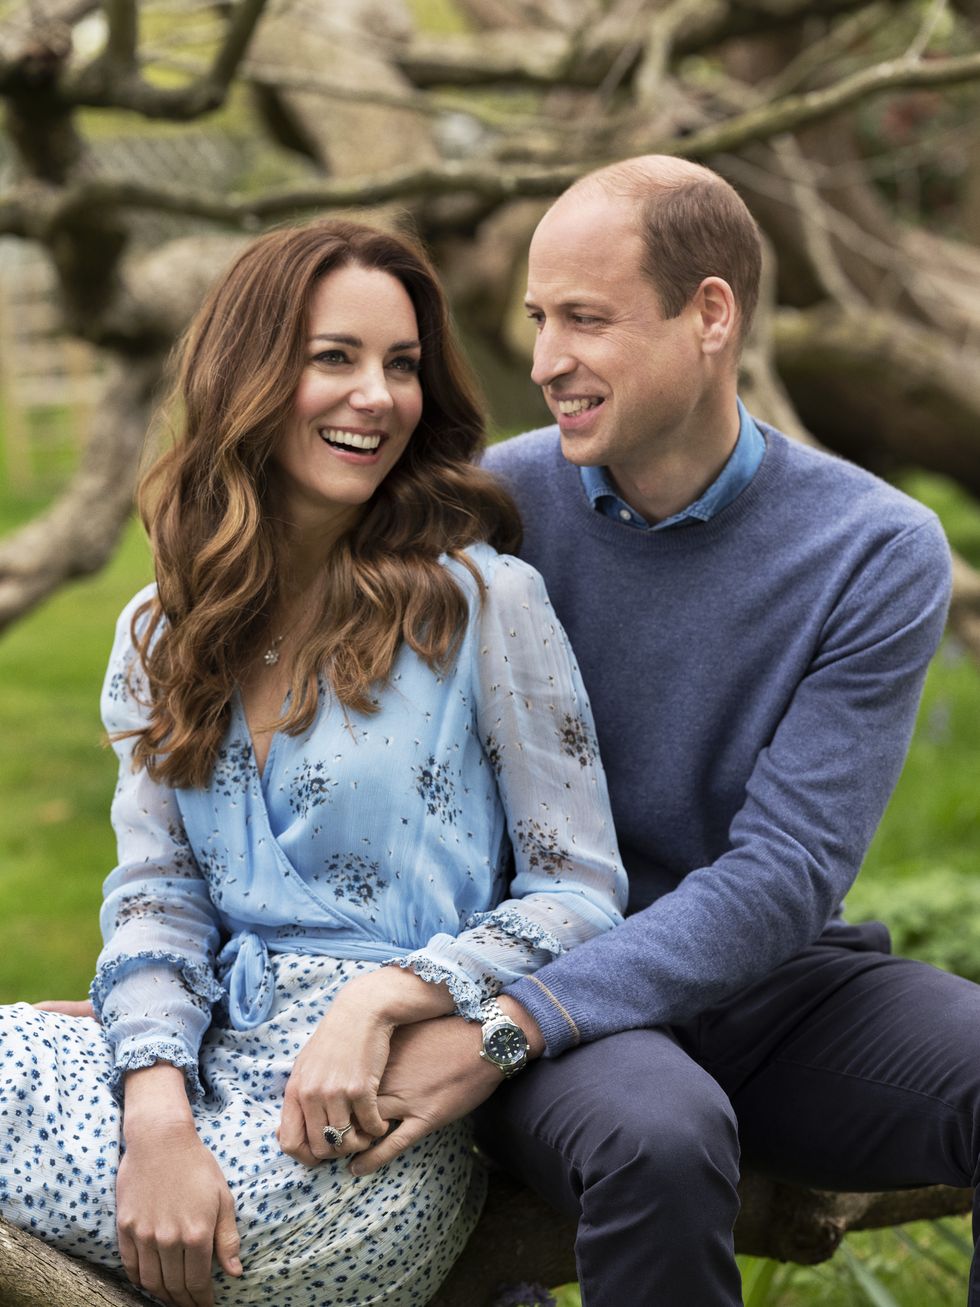 embargoed until 2230hrs bst april 28th 2021 the duke and duchess of cambridgea new portrait of the duke and duchess of cambridge taken at kensington palace this week to mark their 10th wedding anniversary obligatory credit line must be observed photo by chris floydcamera press this image is provided for free editorial use in connection with the anniversary until may 12th 2021 it must then be removed from your databases thereafter it will be available only via camera press strictly editorial news only, no commercial, souvenir or promotional use permitted magazine cover usages require approval no print sales the photograph cannot be cropped, manipulated or altered in any way